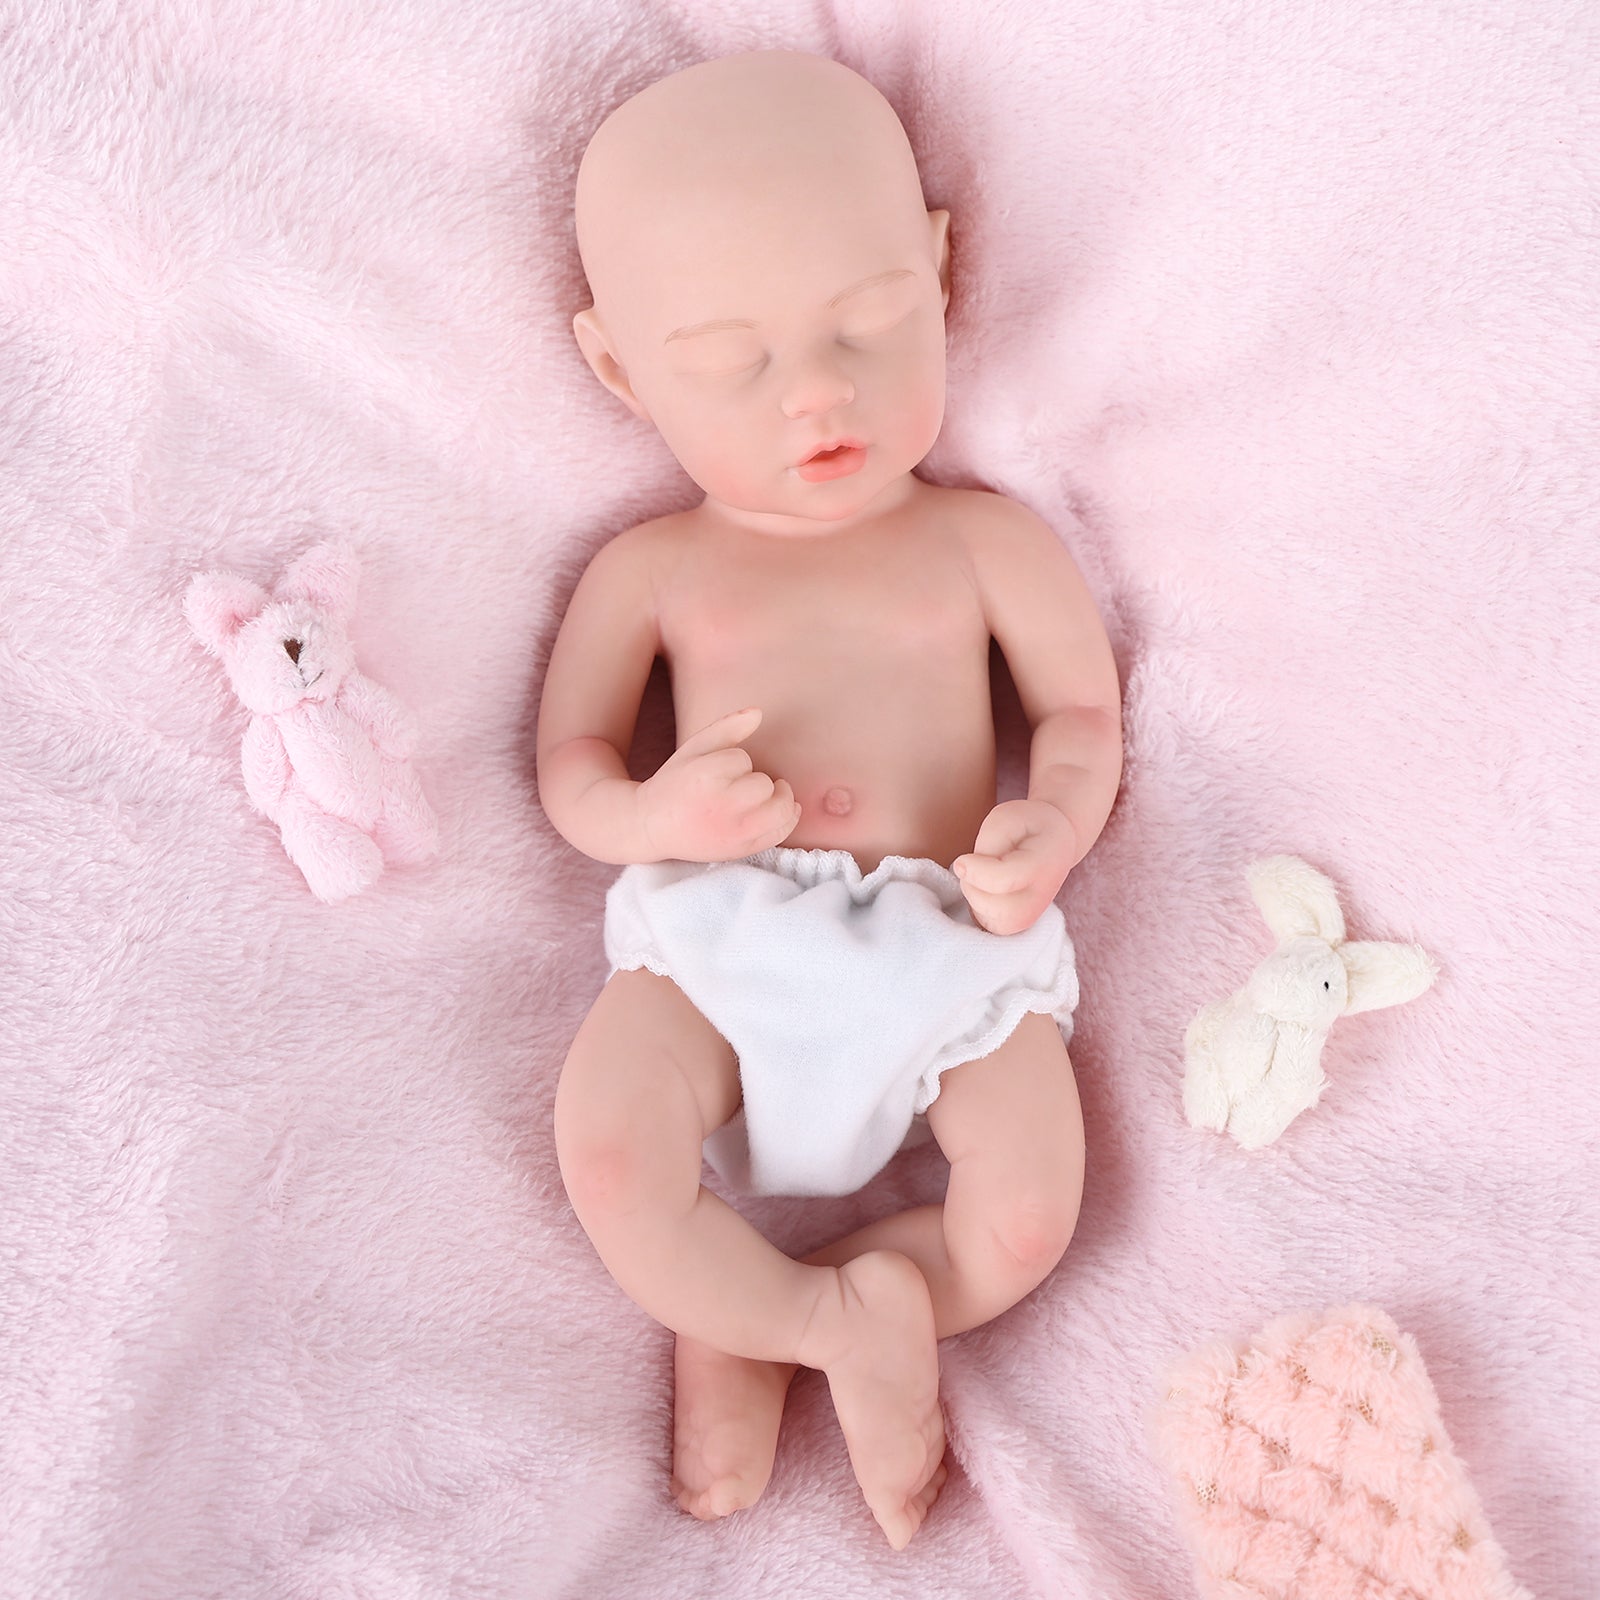 Silicone Baby Babeside Soft Reborn Baby Dolls Newborn Kay That Looks Real Baby